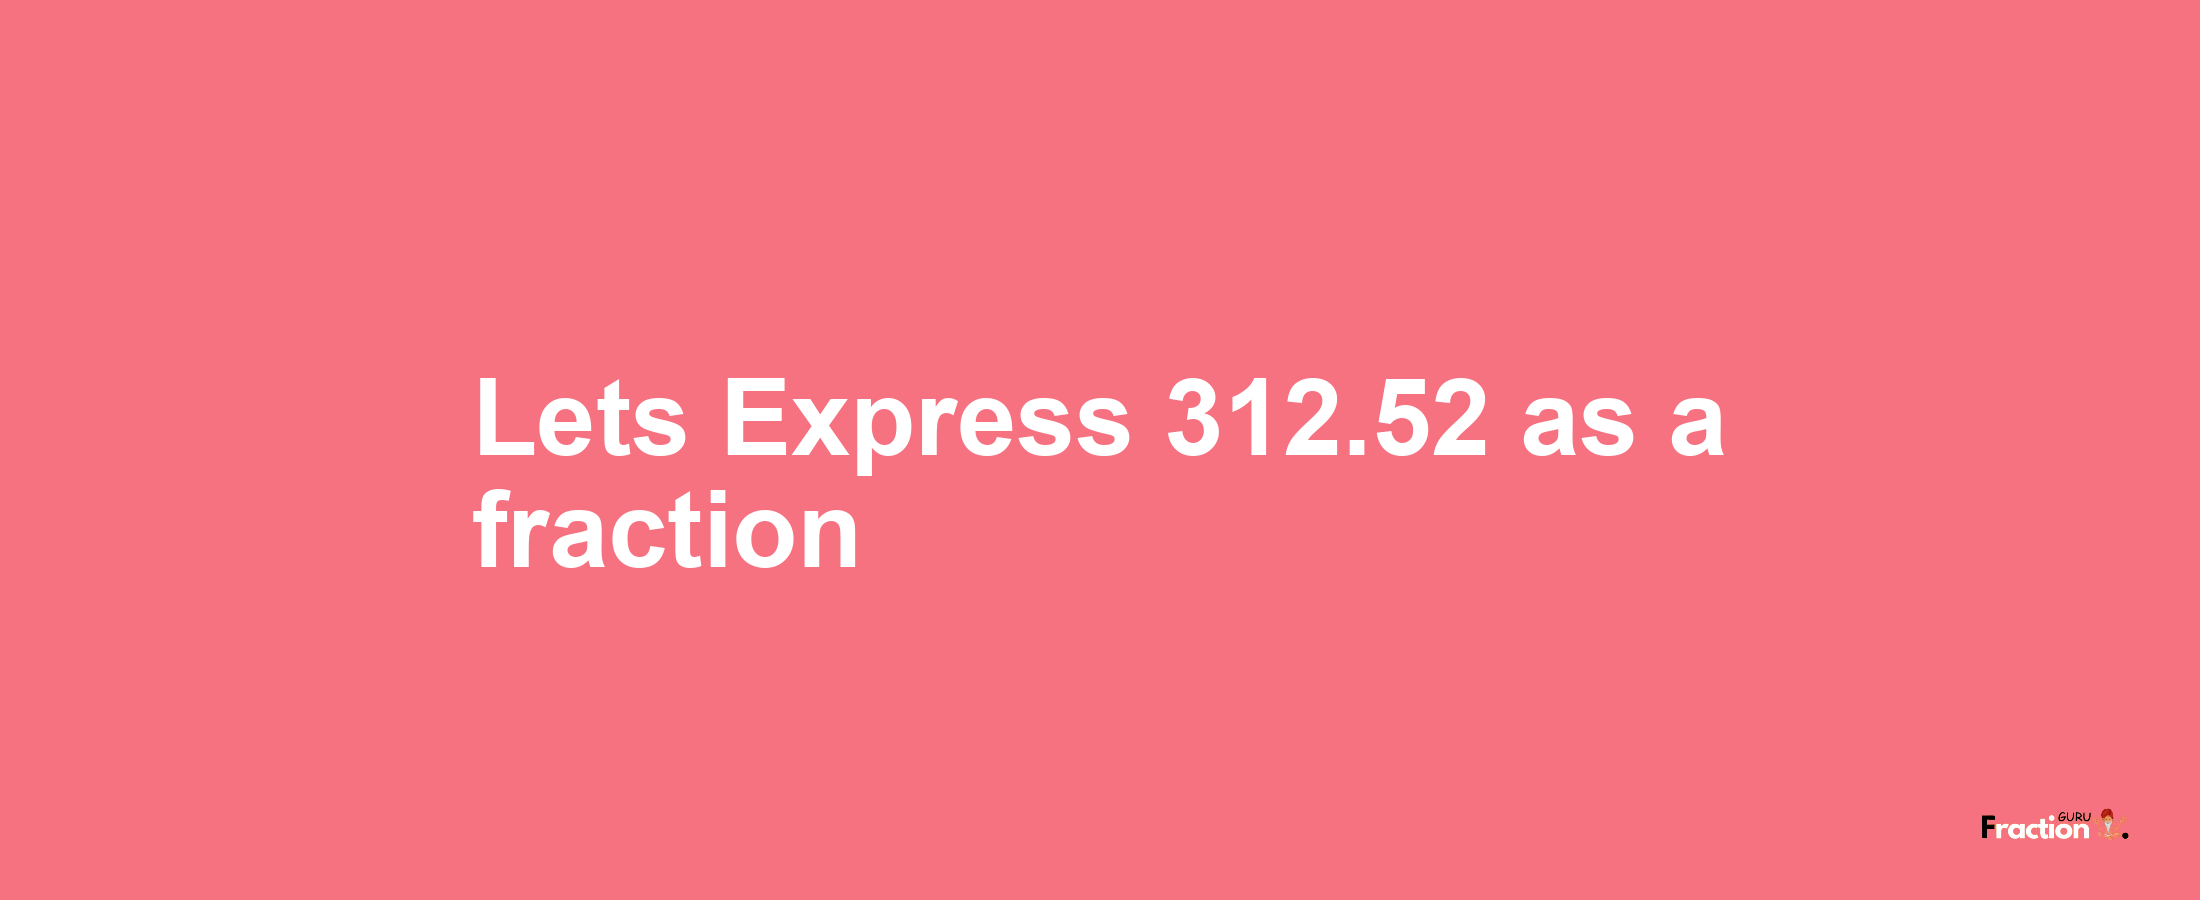 Lets Express 312.52 as afraction